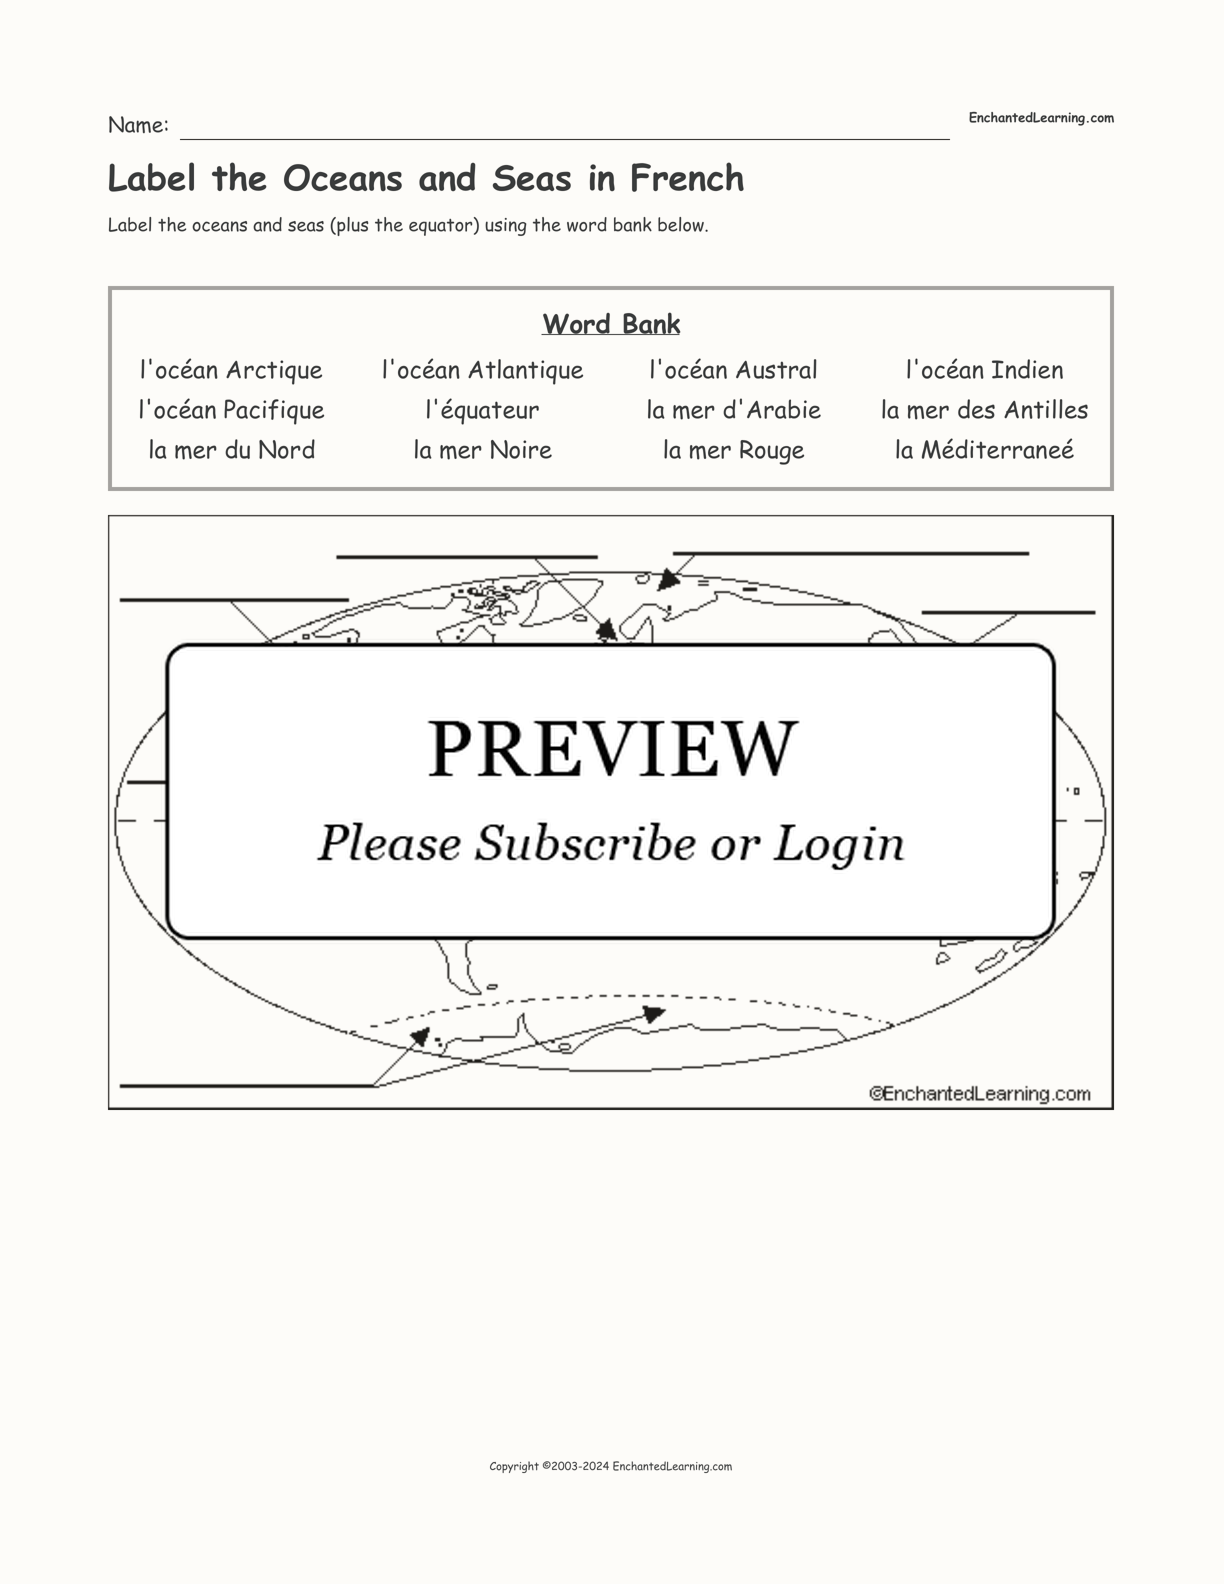 Label the Oceans and Seas in French interactive worksheet page 1